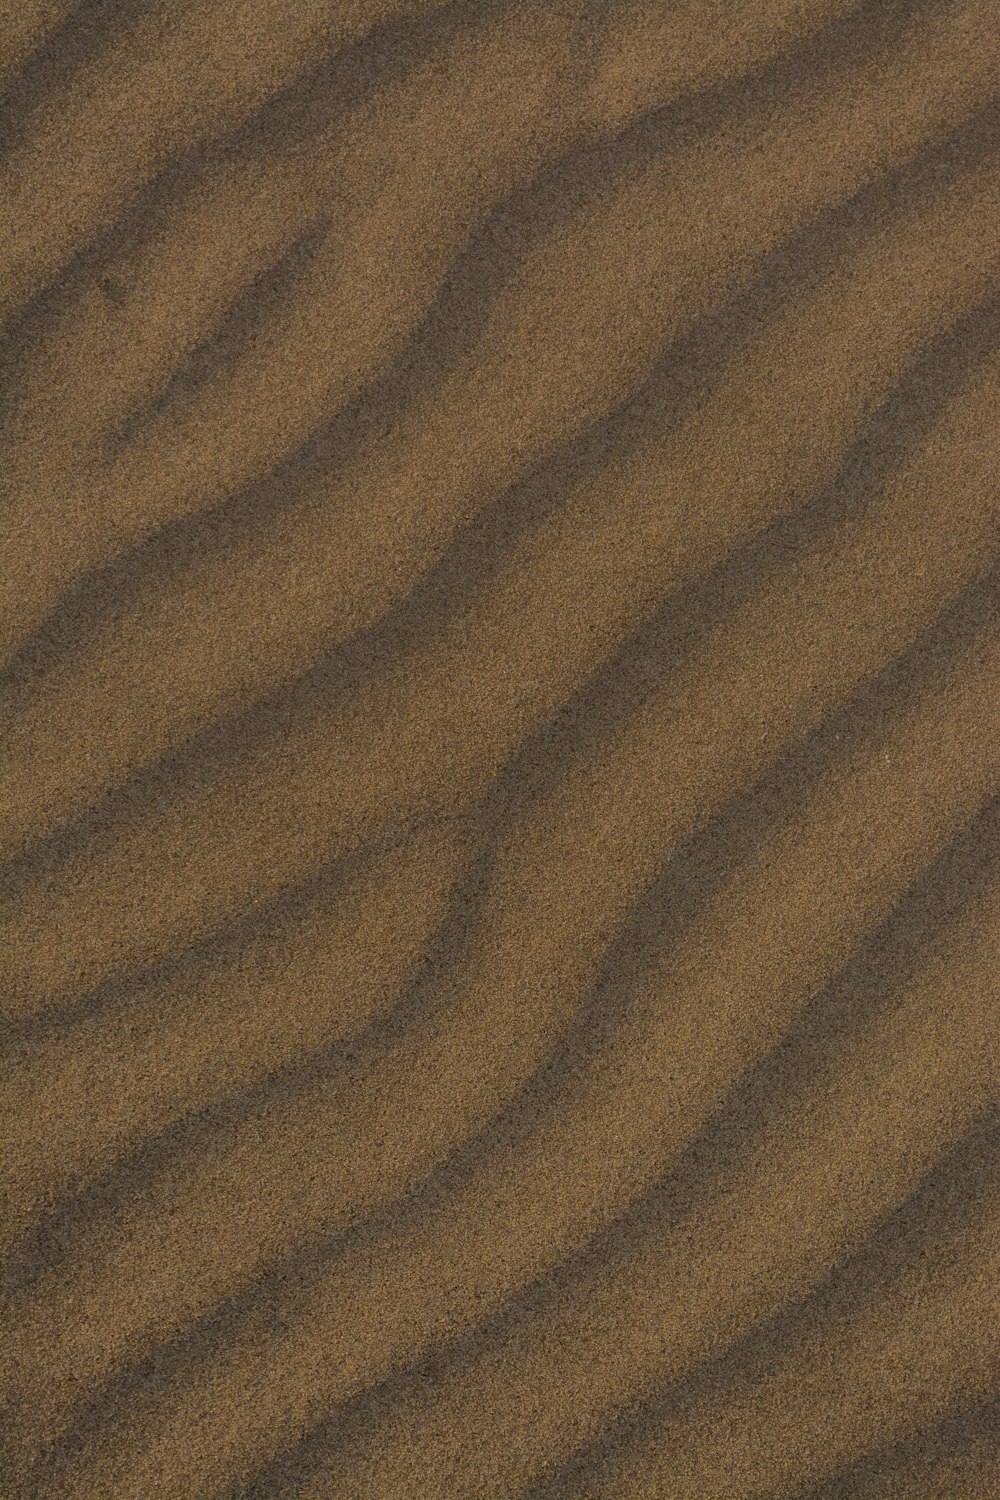 a sandy beach with a small wave in the sand